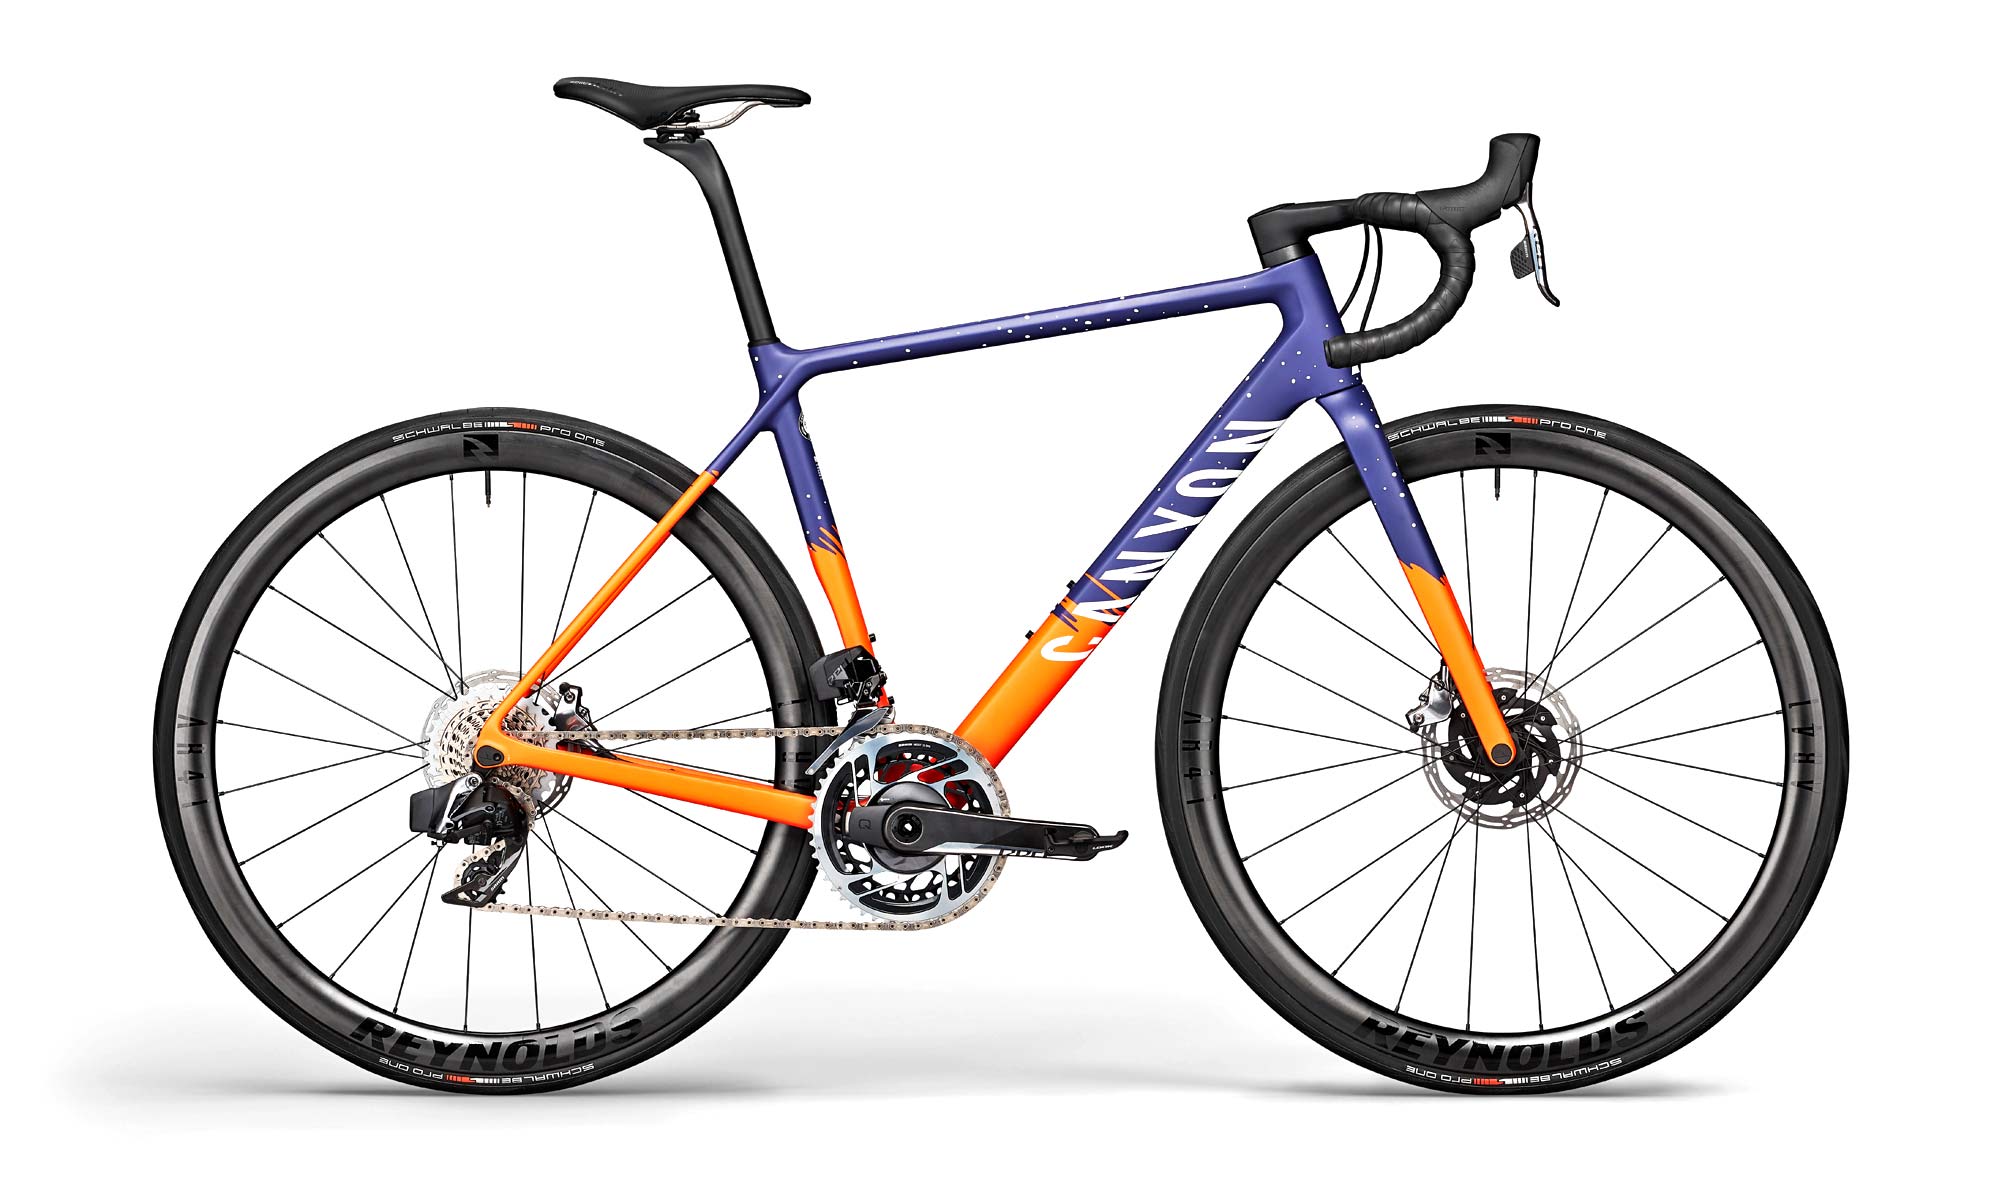 2021 Canyon Ultimate updates new looks, new builds, keeps rim 